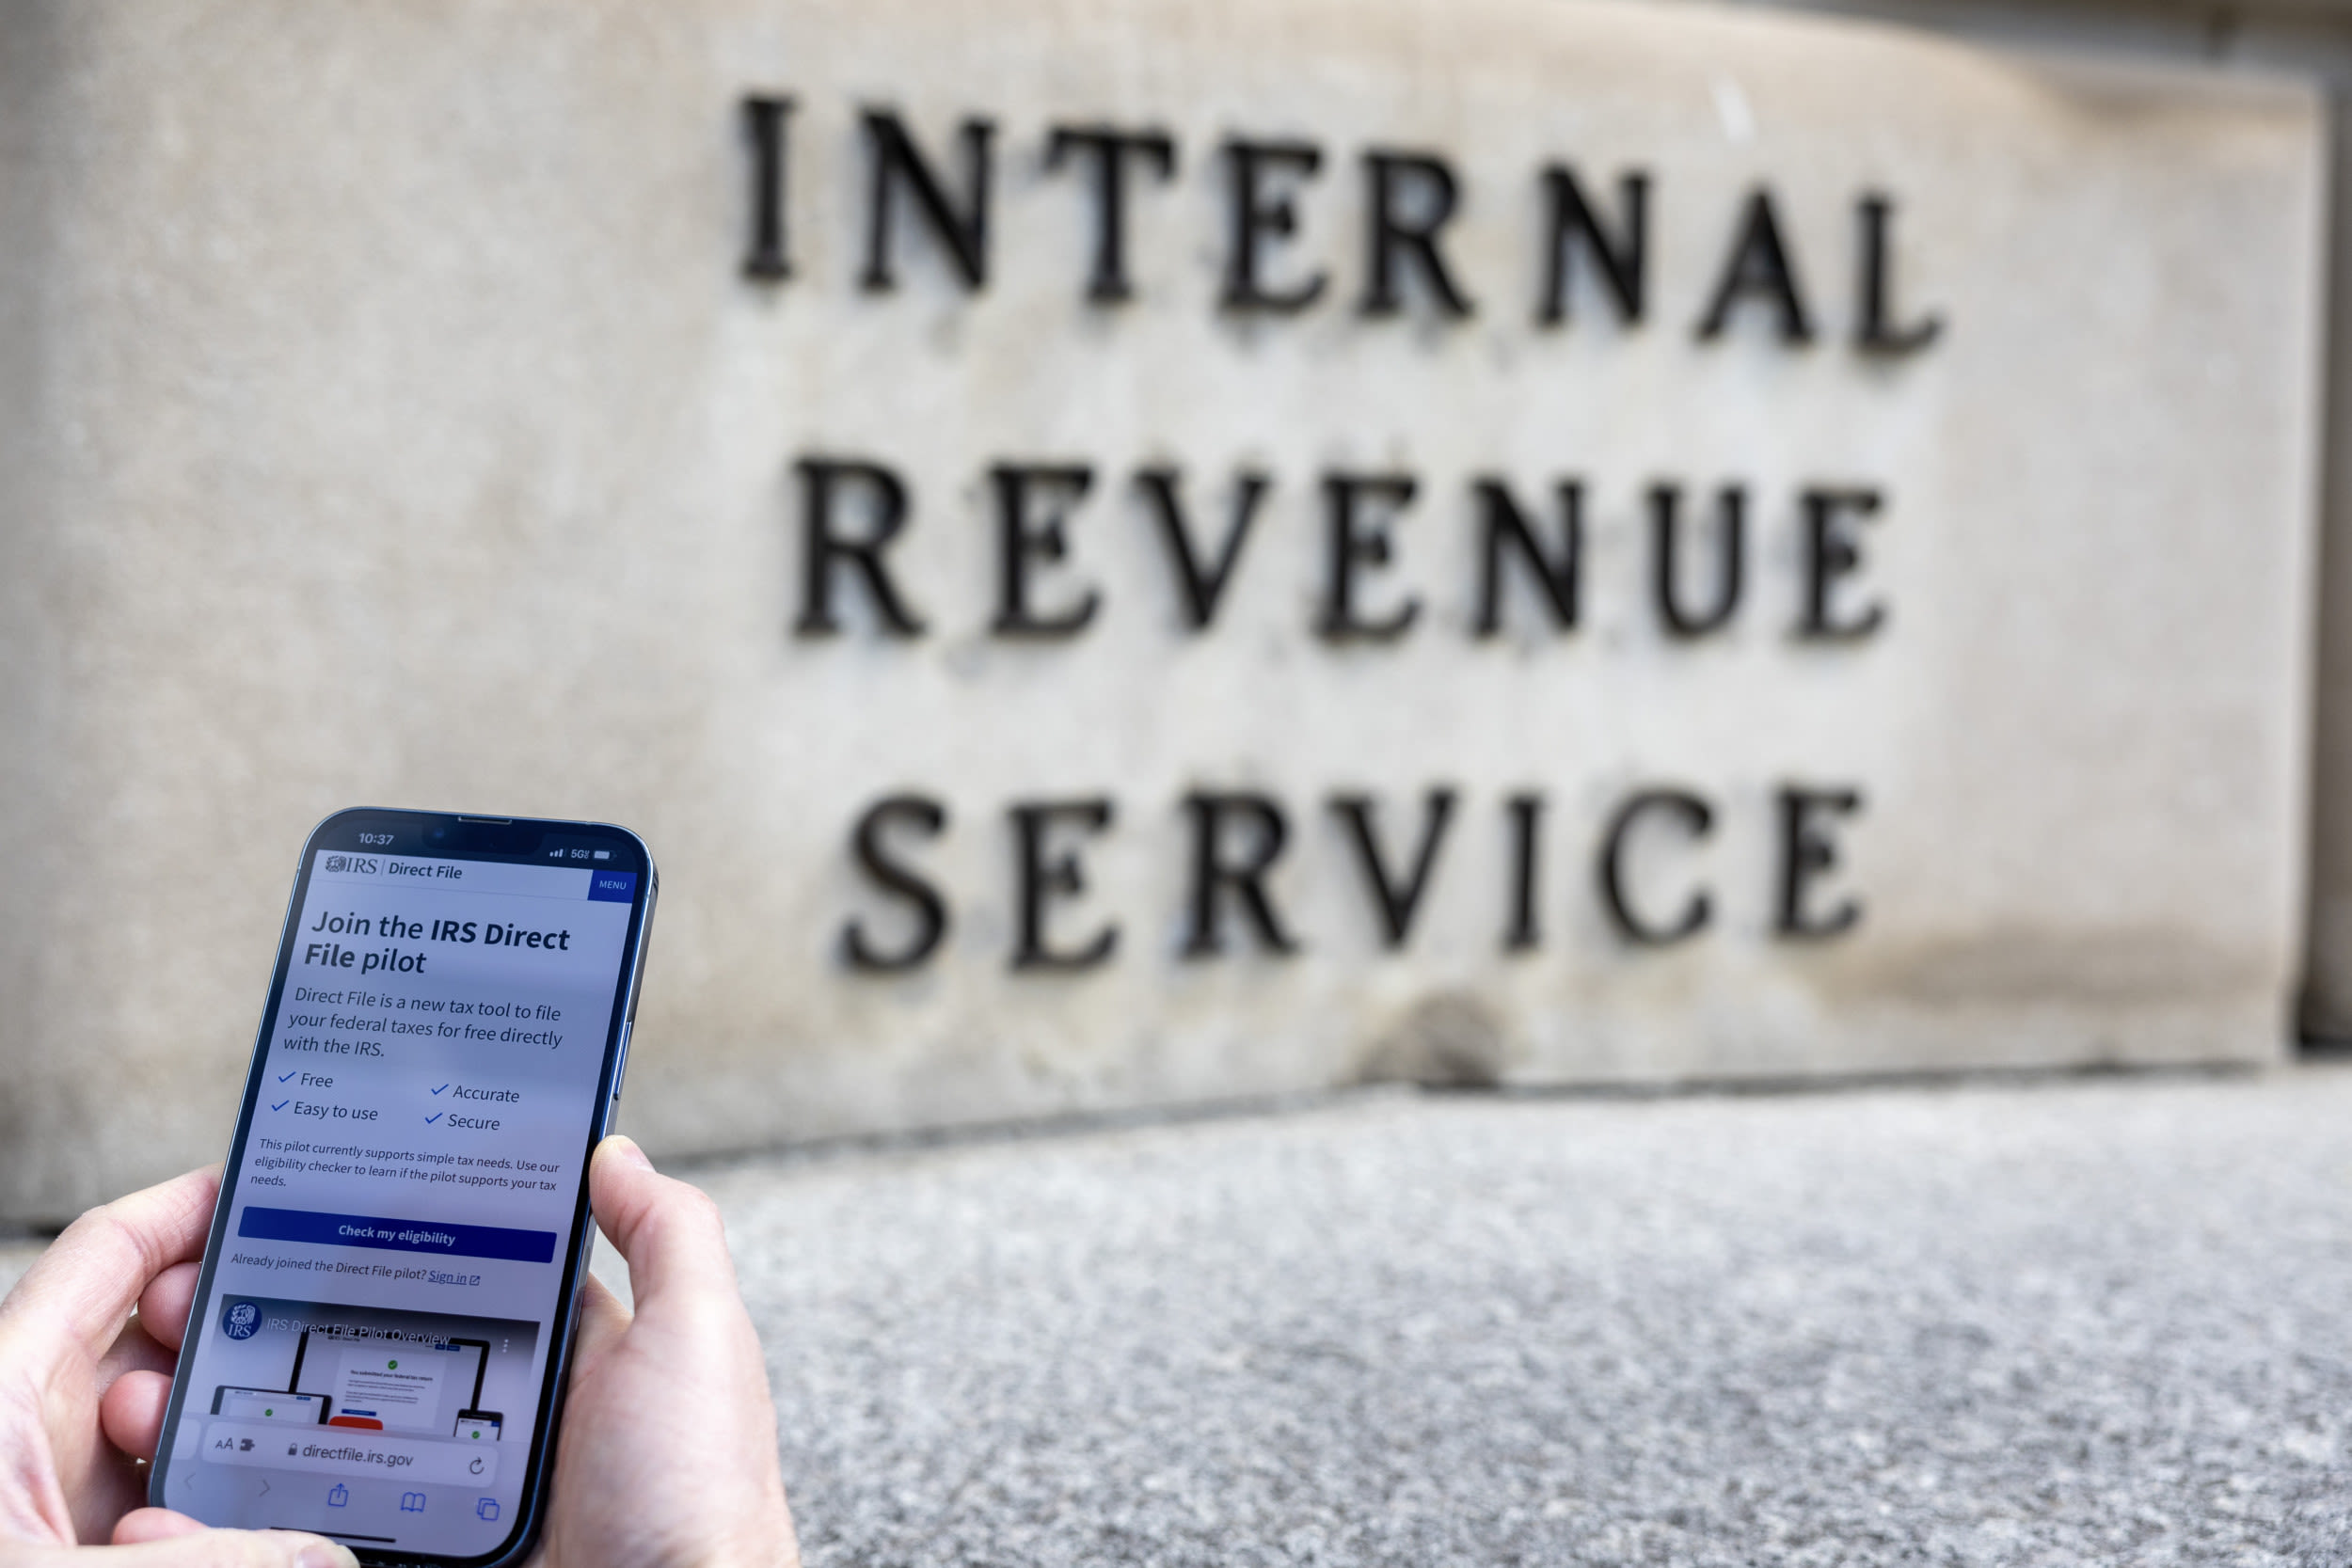 Three tax refunds that are raising alarms with IRS